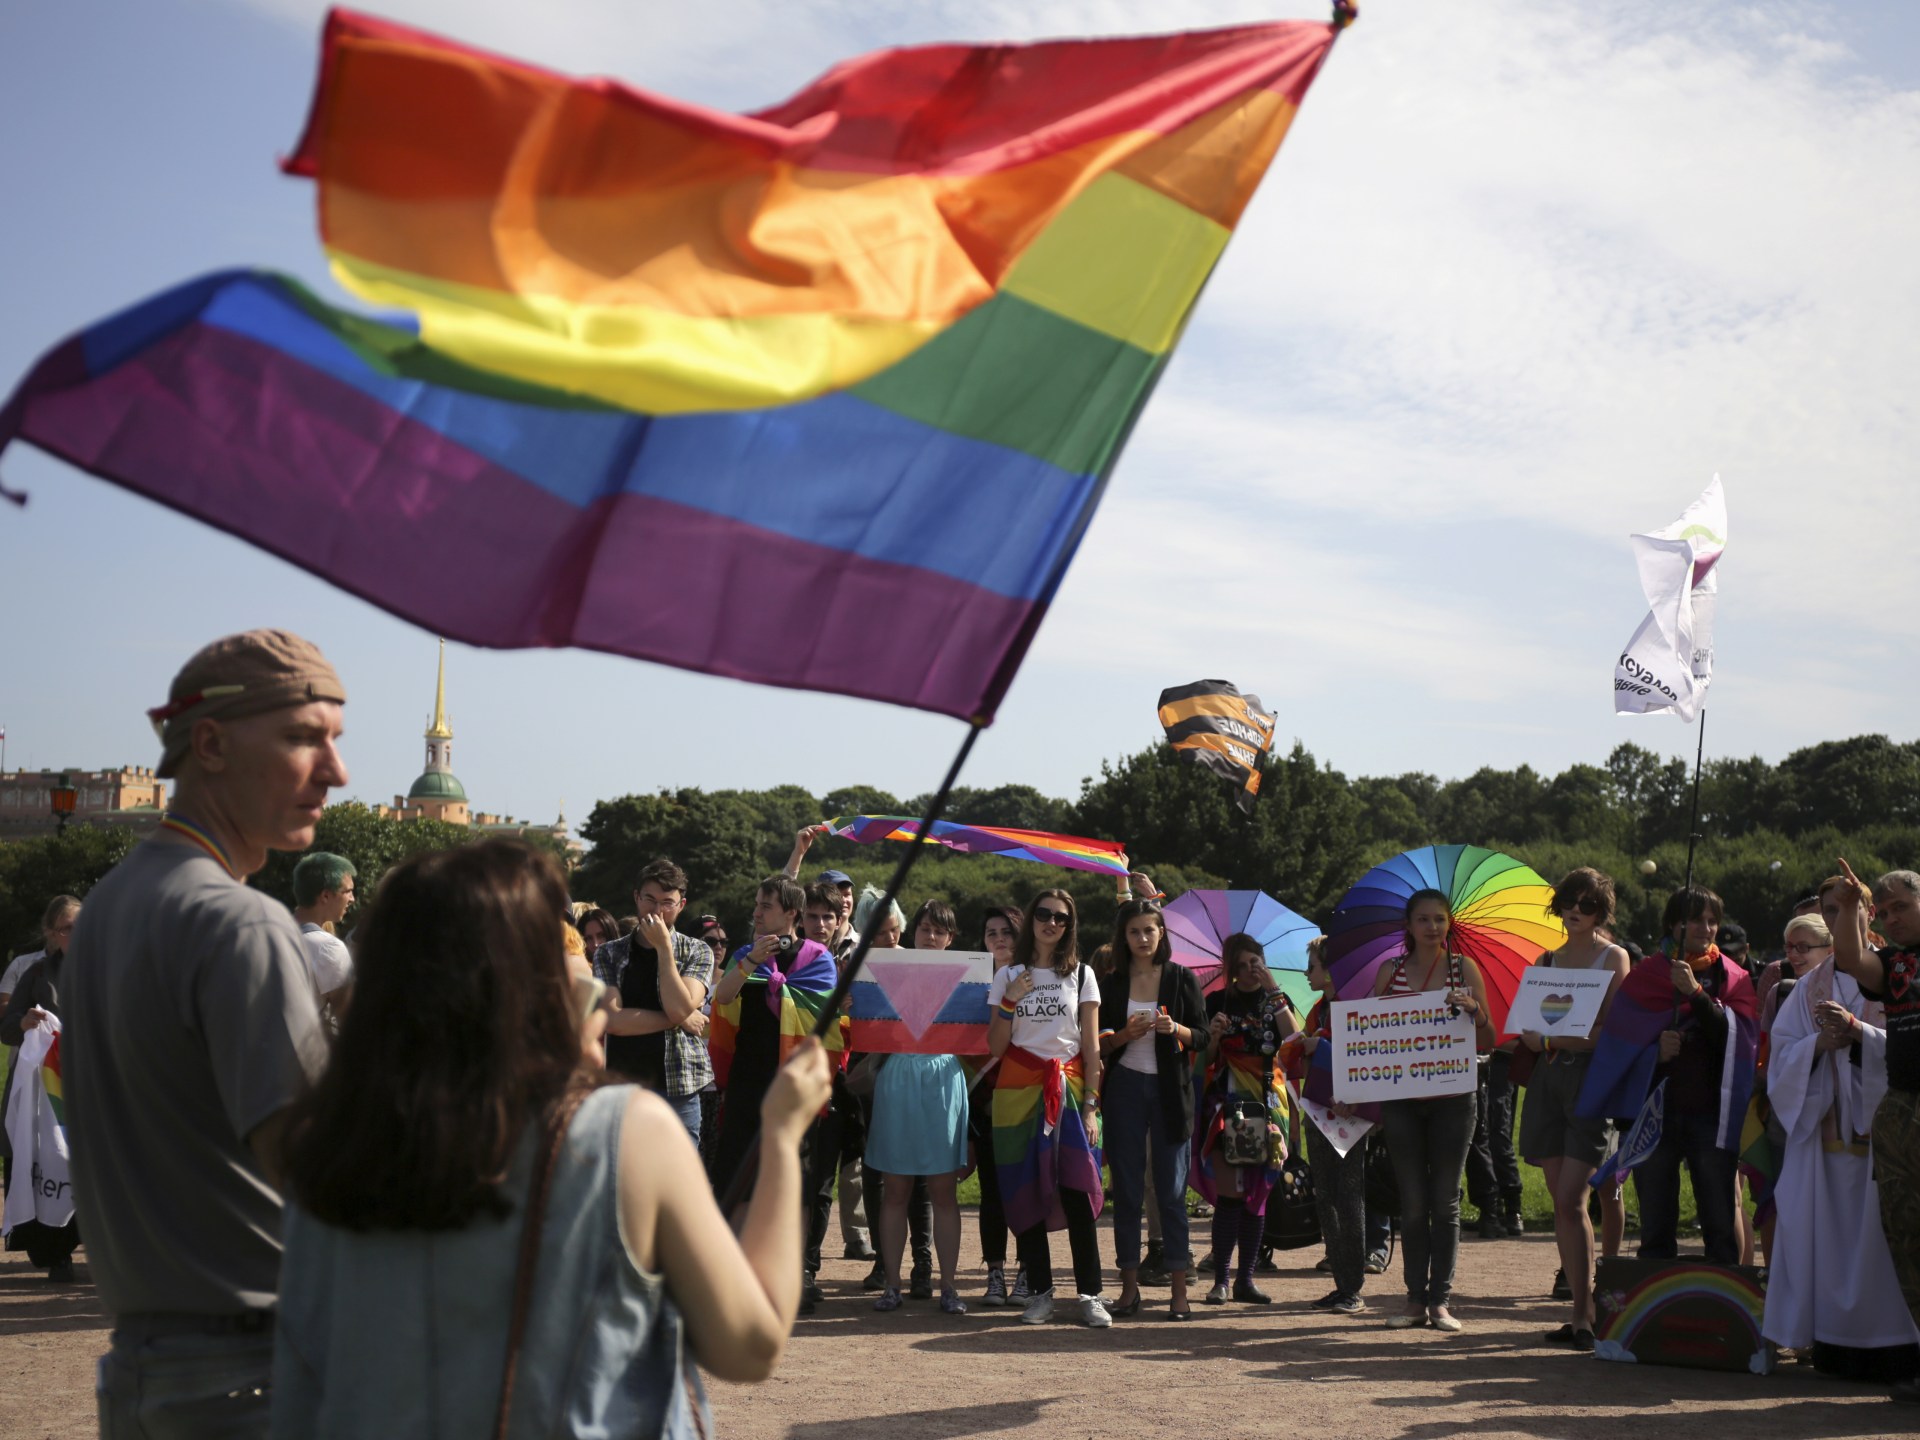 Two bar workers arrested in Russia’s first LGBTQ ‘extremism’ case | LGBTQ News